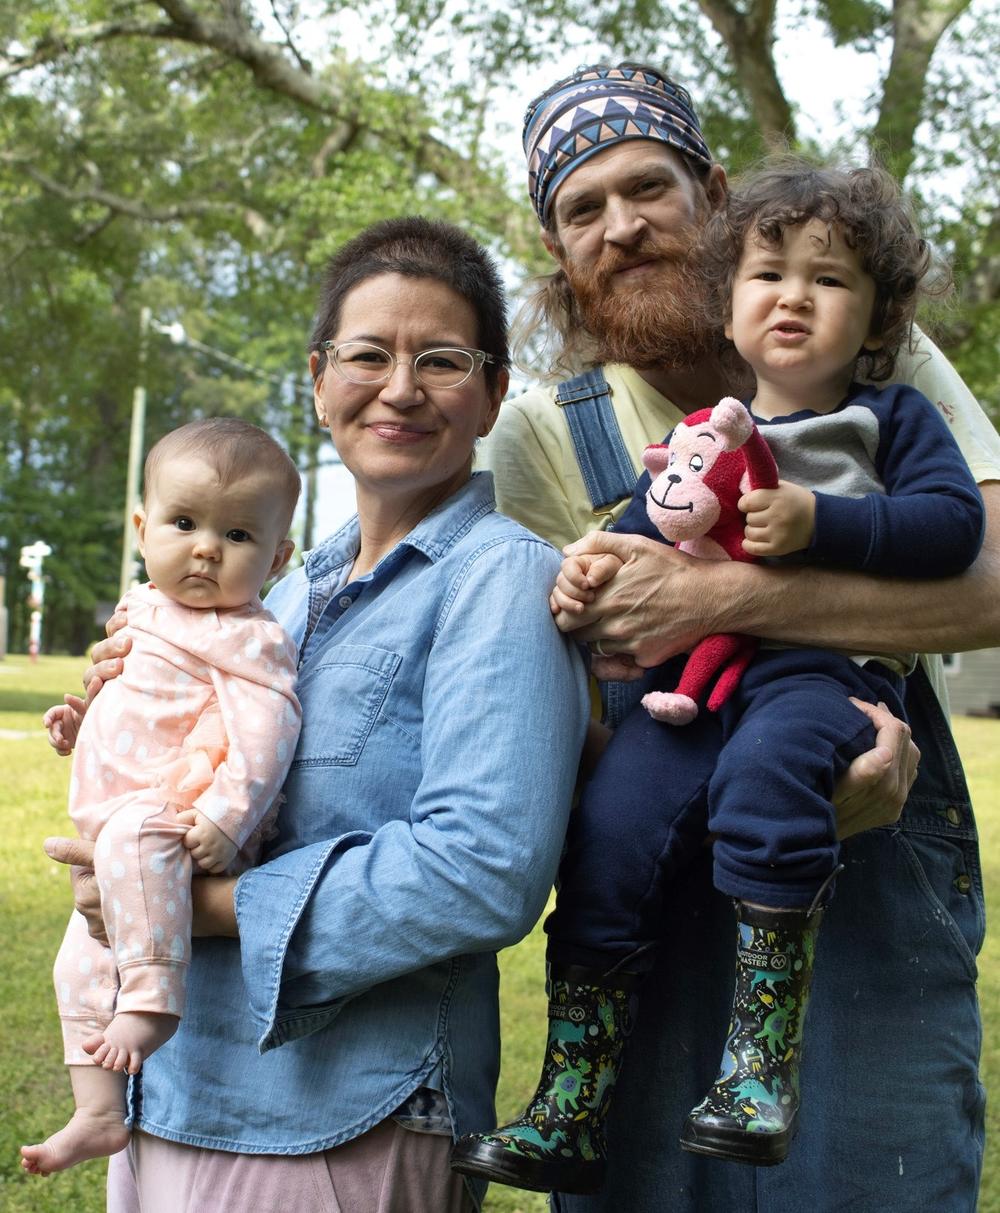 Kyle BlackCatTips Brooks, a folk artist from Georgia, with his family during the April 2020 coronavirus pandemic.